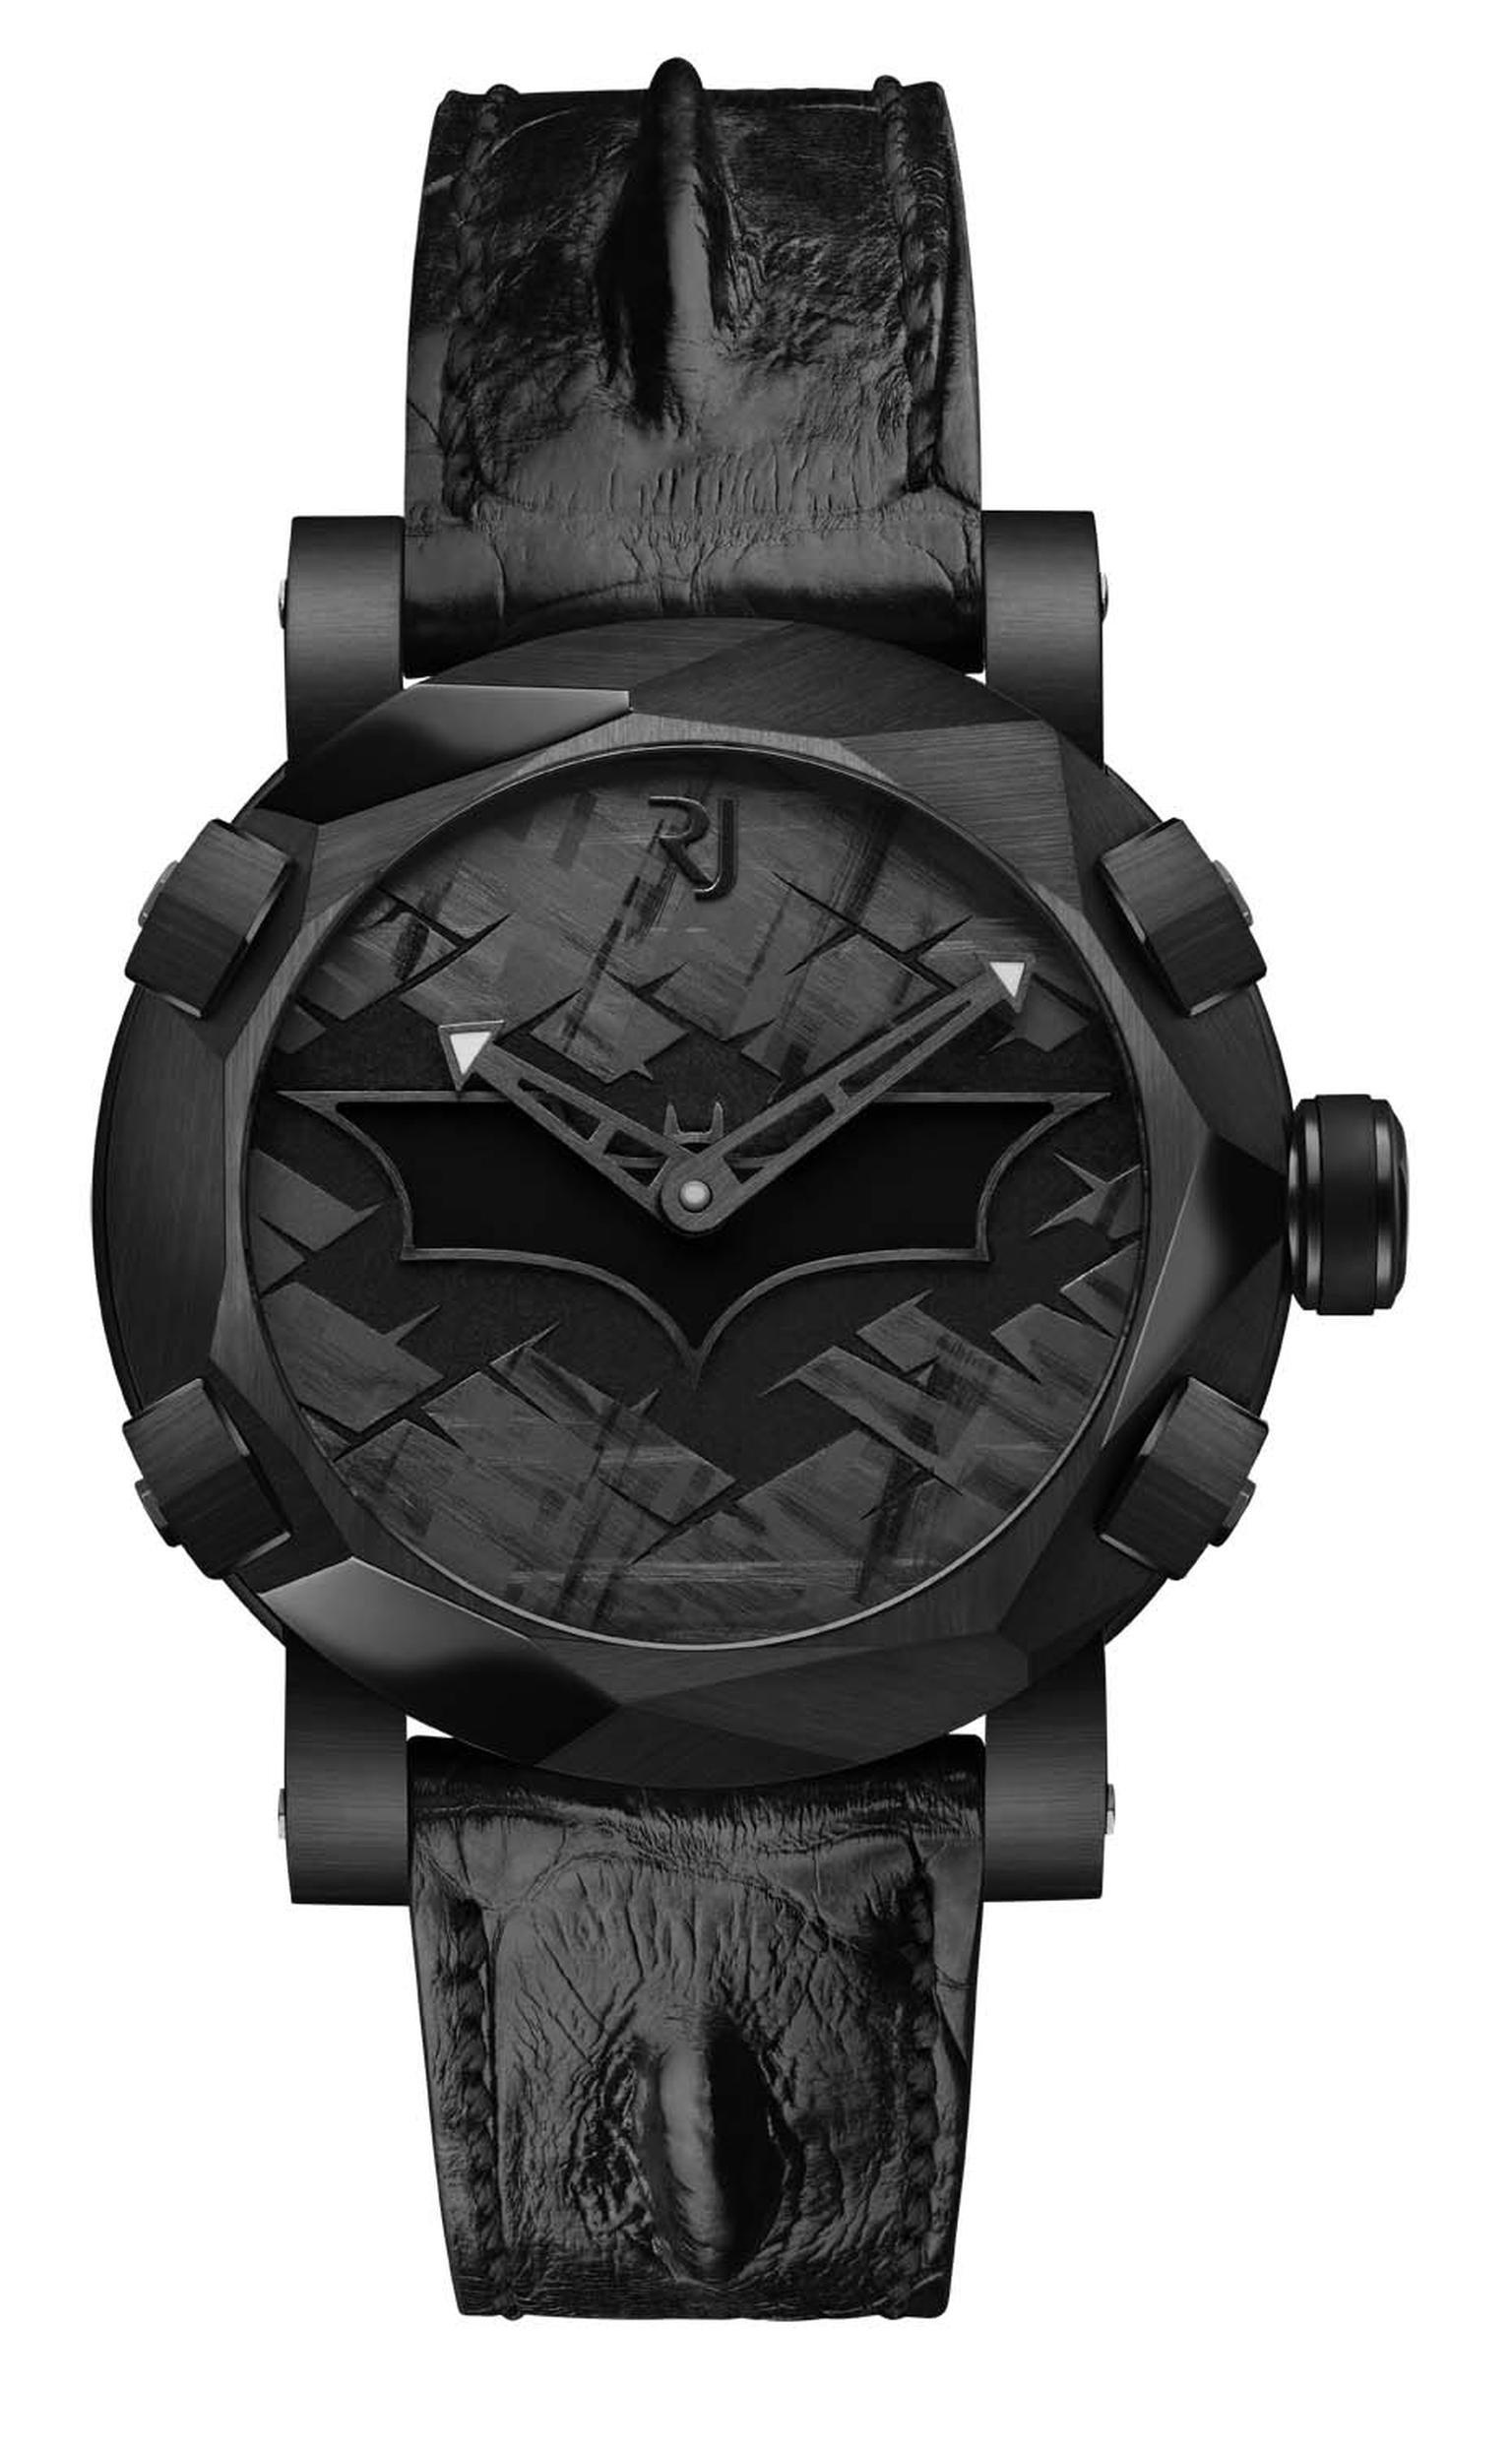 The RJ-Romain Jerome Batman-DNA watch features a dial with a black lacquered Batman symbol surrounded by a halo of luminescence - the legendary Bat-Signal - set against the Gotham City skyline. Fitted with a mechanical self-winding movement, the watch is 